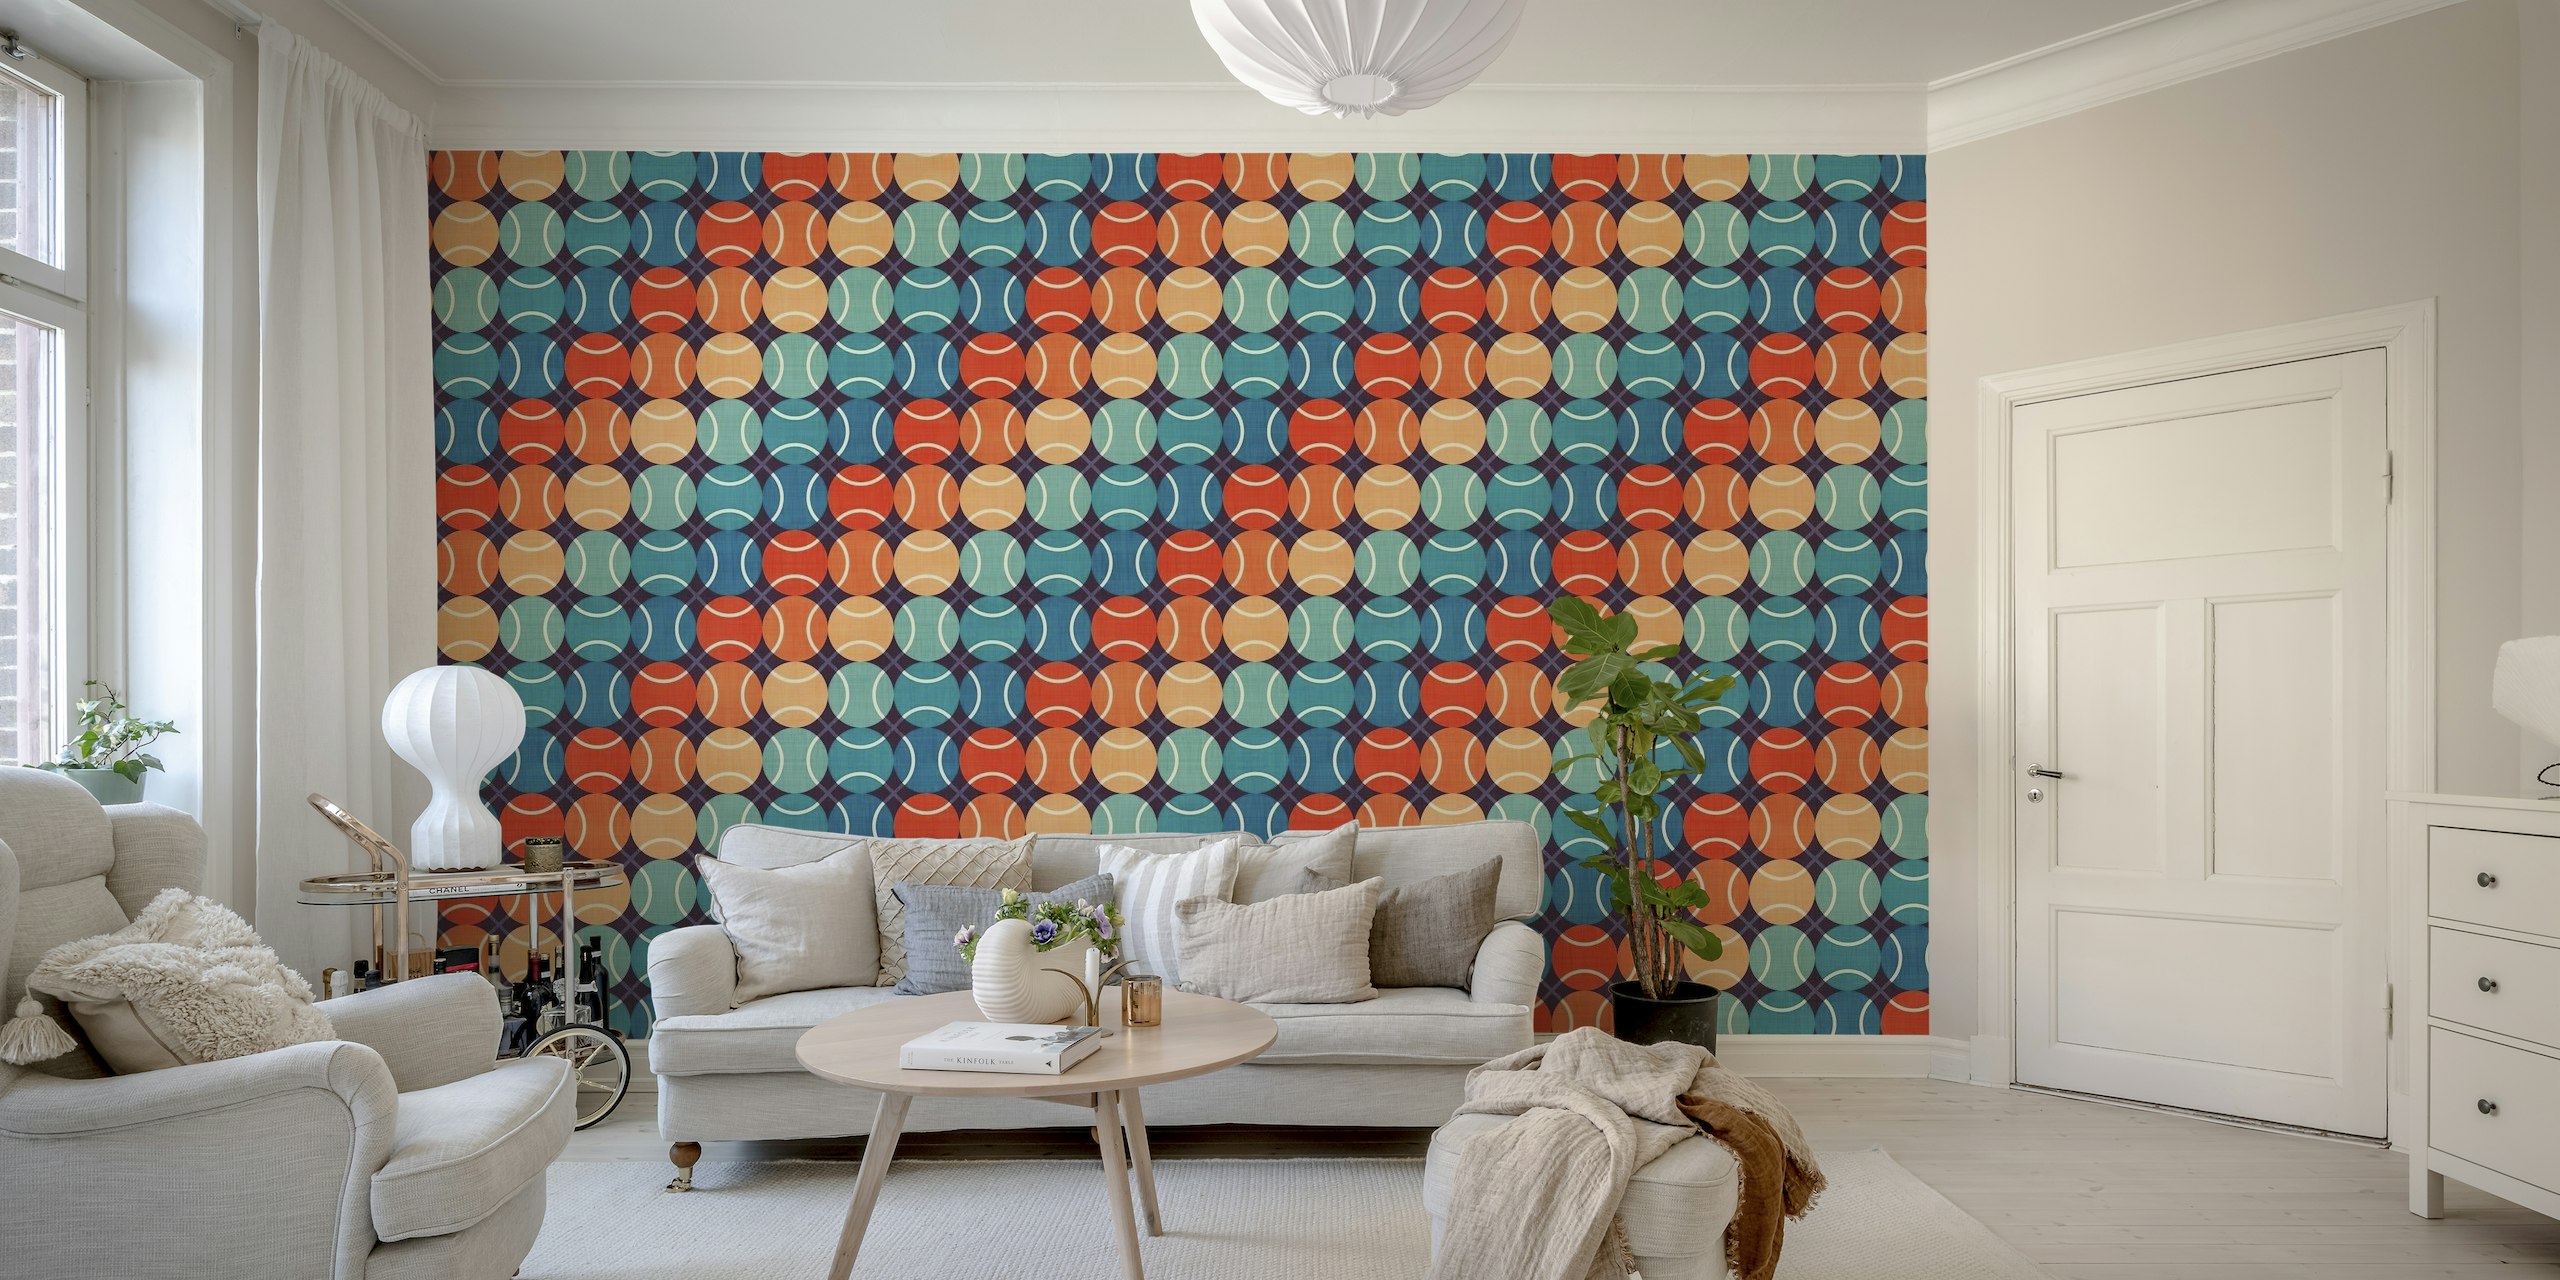 Colorful retro-style wall mural featuring tennis ball patterns with rainbow stripes on a dark background